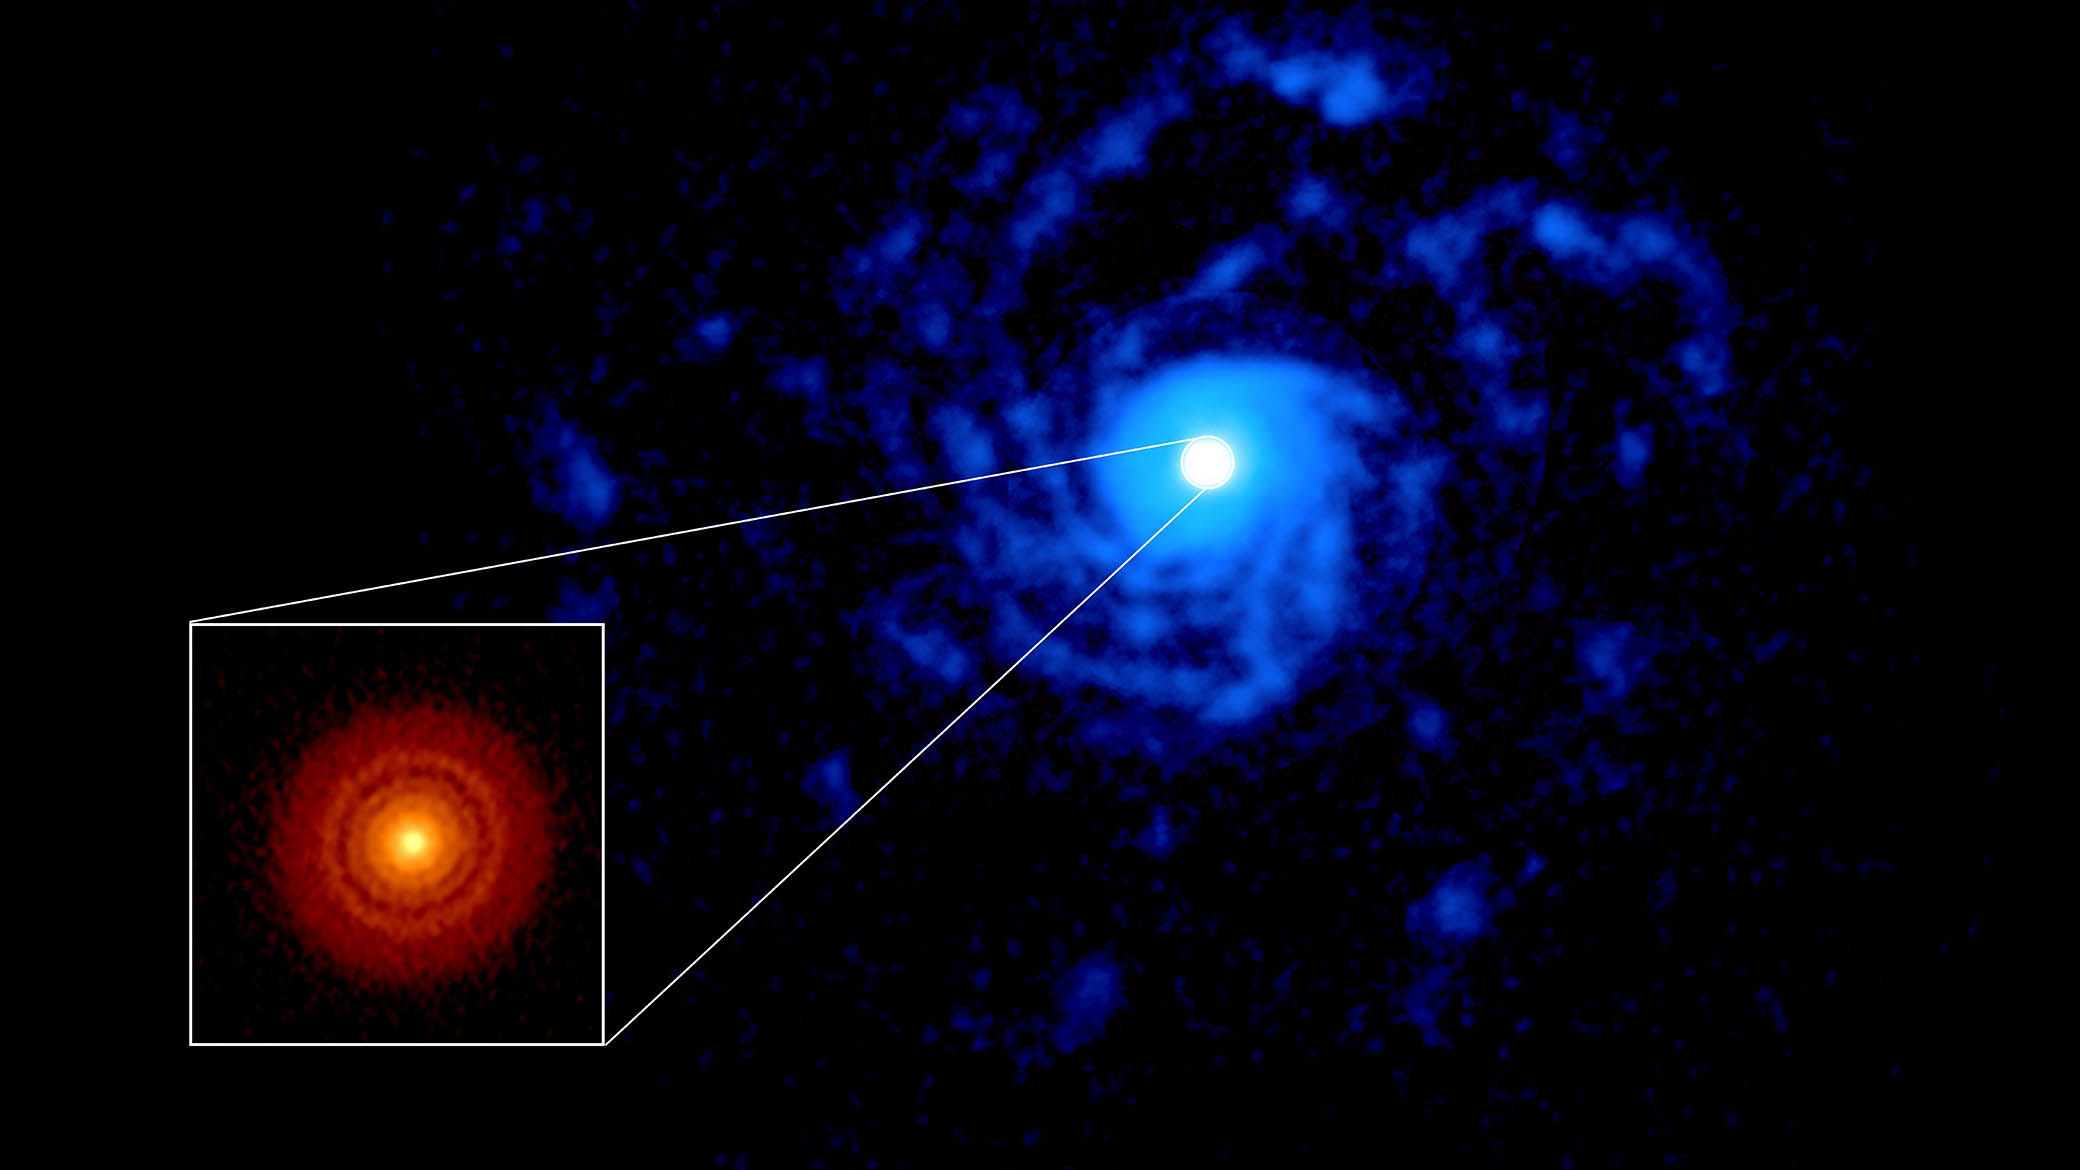 ALMA image of the planet-forming disk around the young star RU Lup. The inset image (lower left, red disk) shows a previous (DSHARP) observation of the dust disk with rings and gaps that hint at the presence of forming planets. The new observation shows a large spiral structure (in blue), made out of gas, that spans far beyond the compact dust disk.